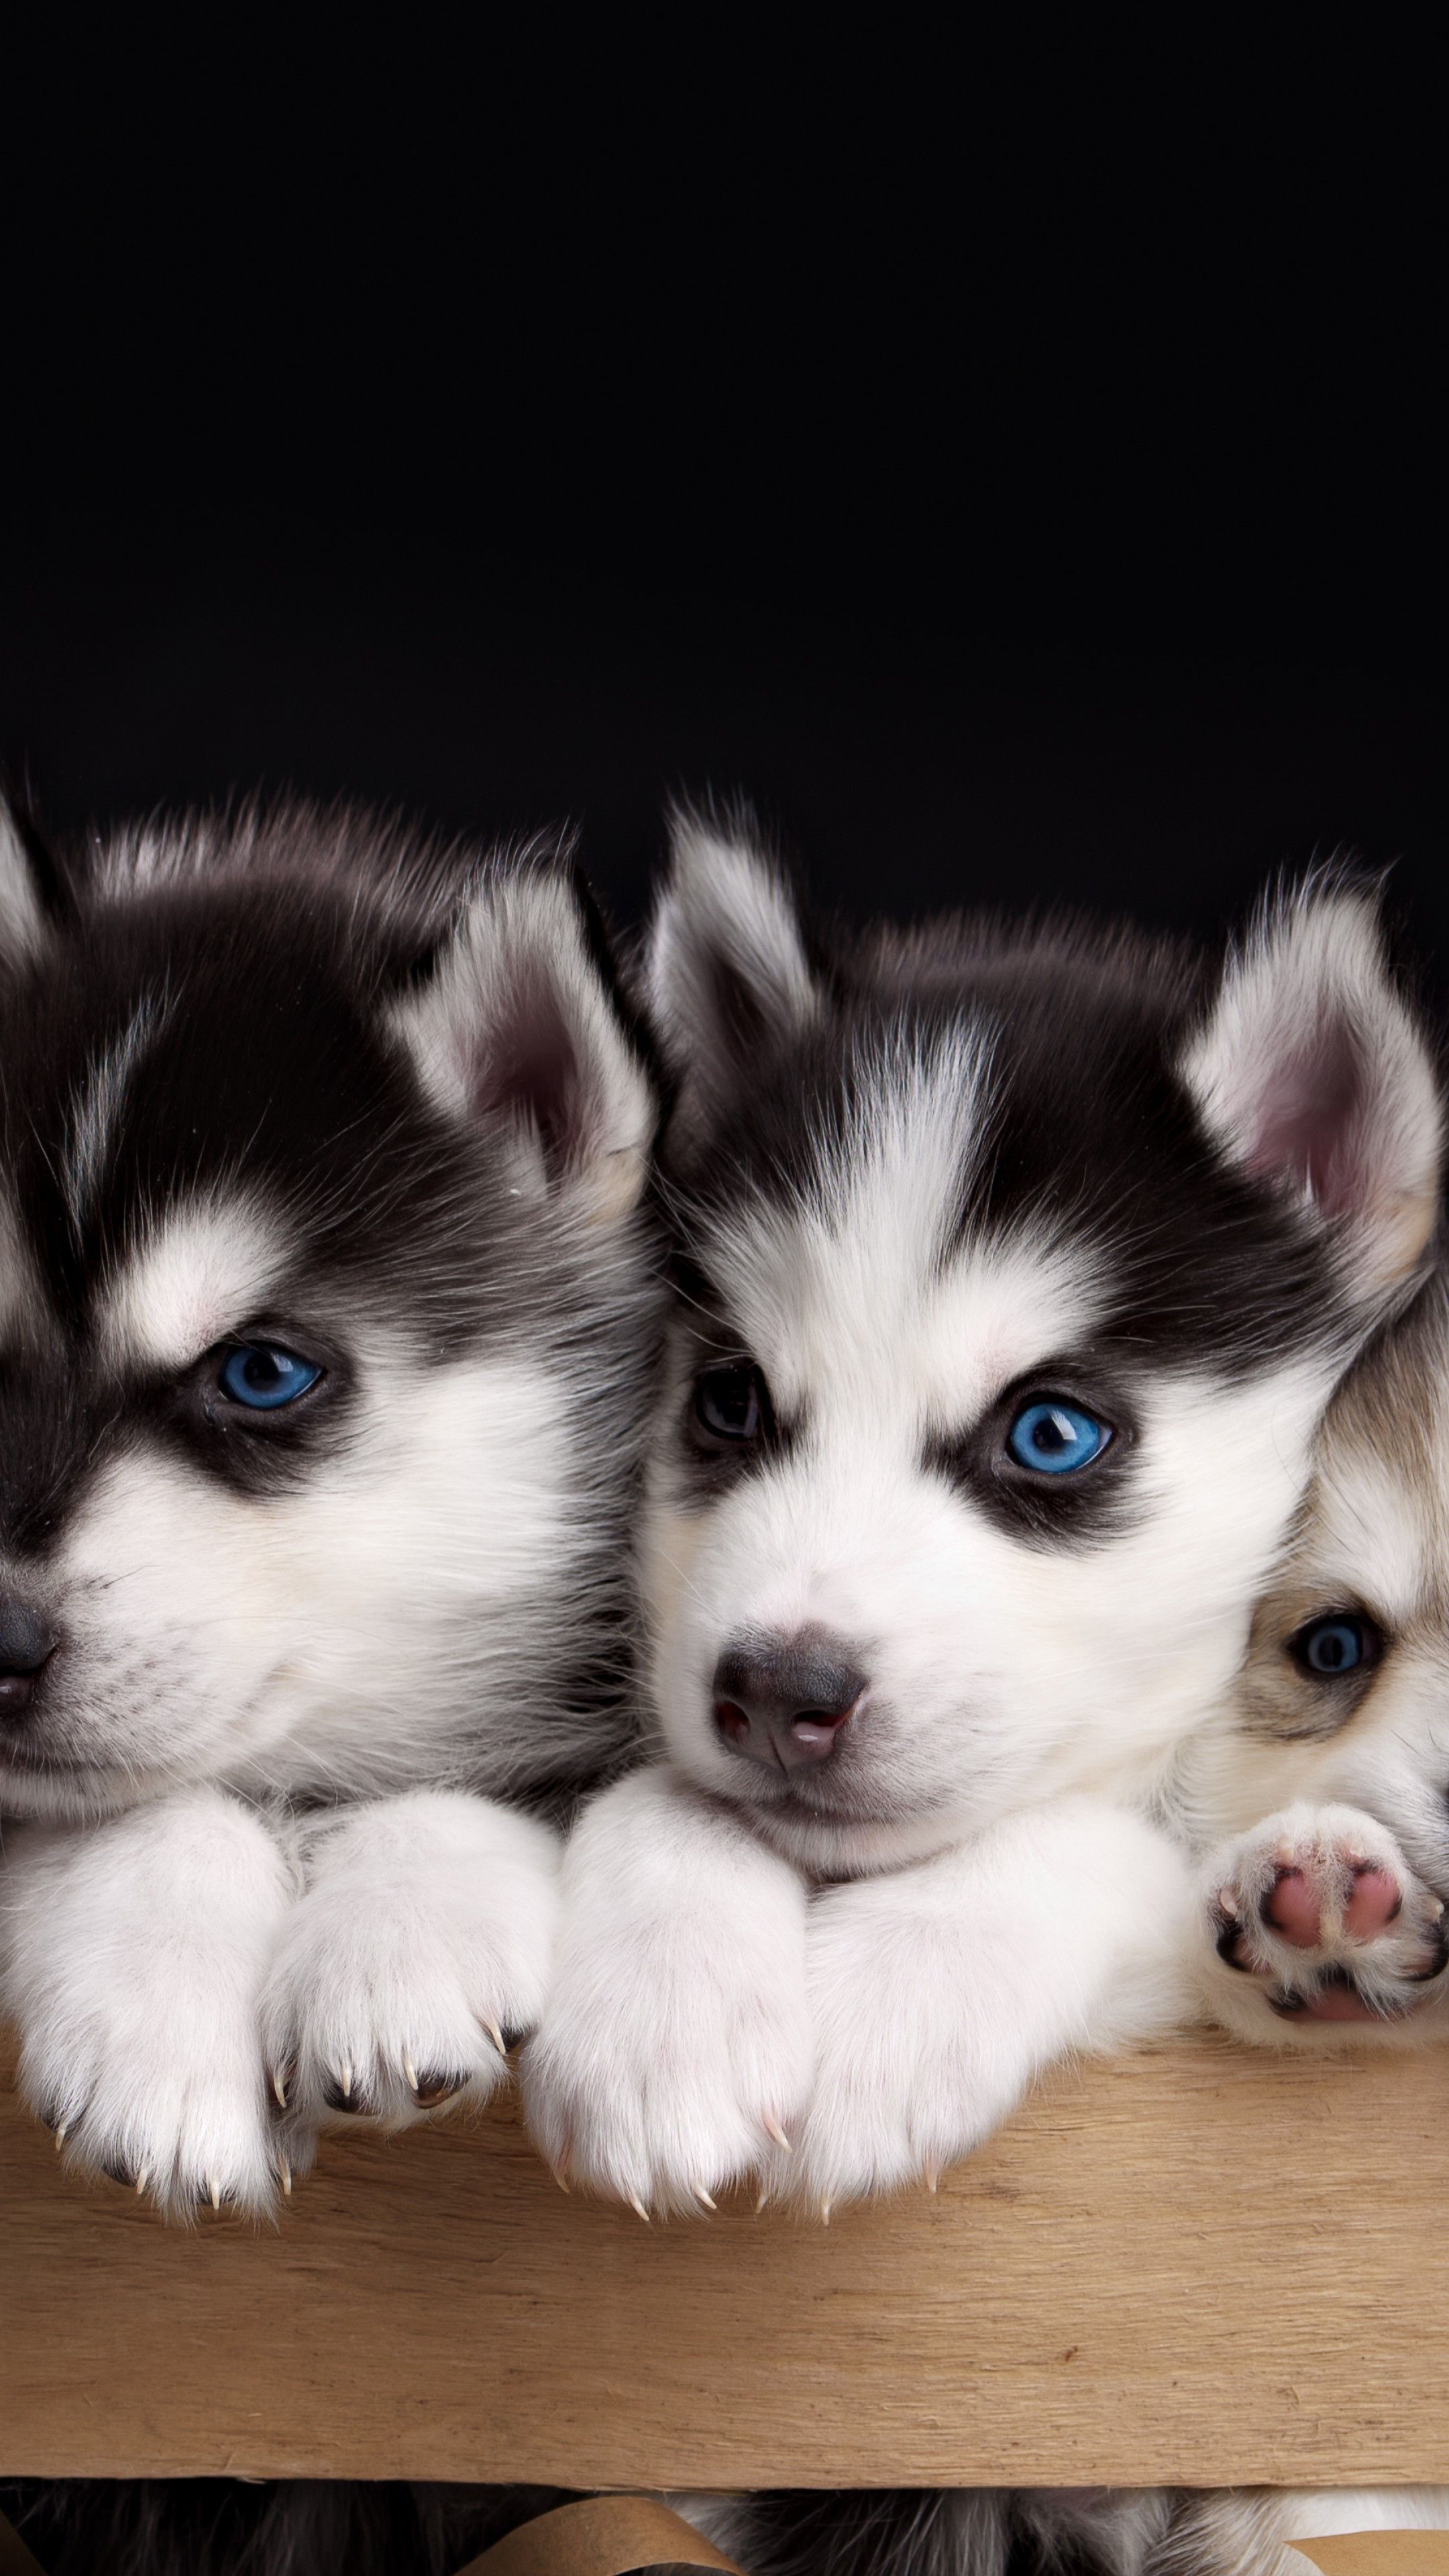 Husky Dog Wallpaper 32 Best Free Husky Dog Image For Android. Cute puppies, Puppies, Siberian husky